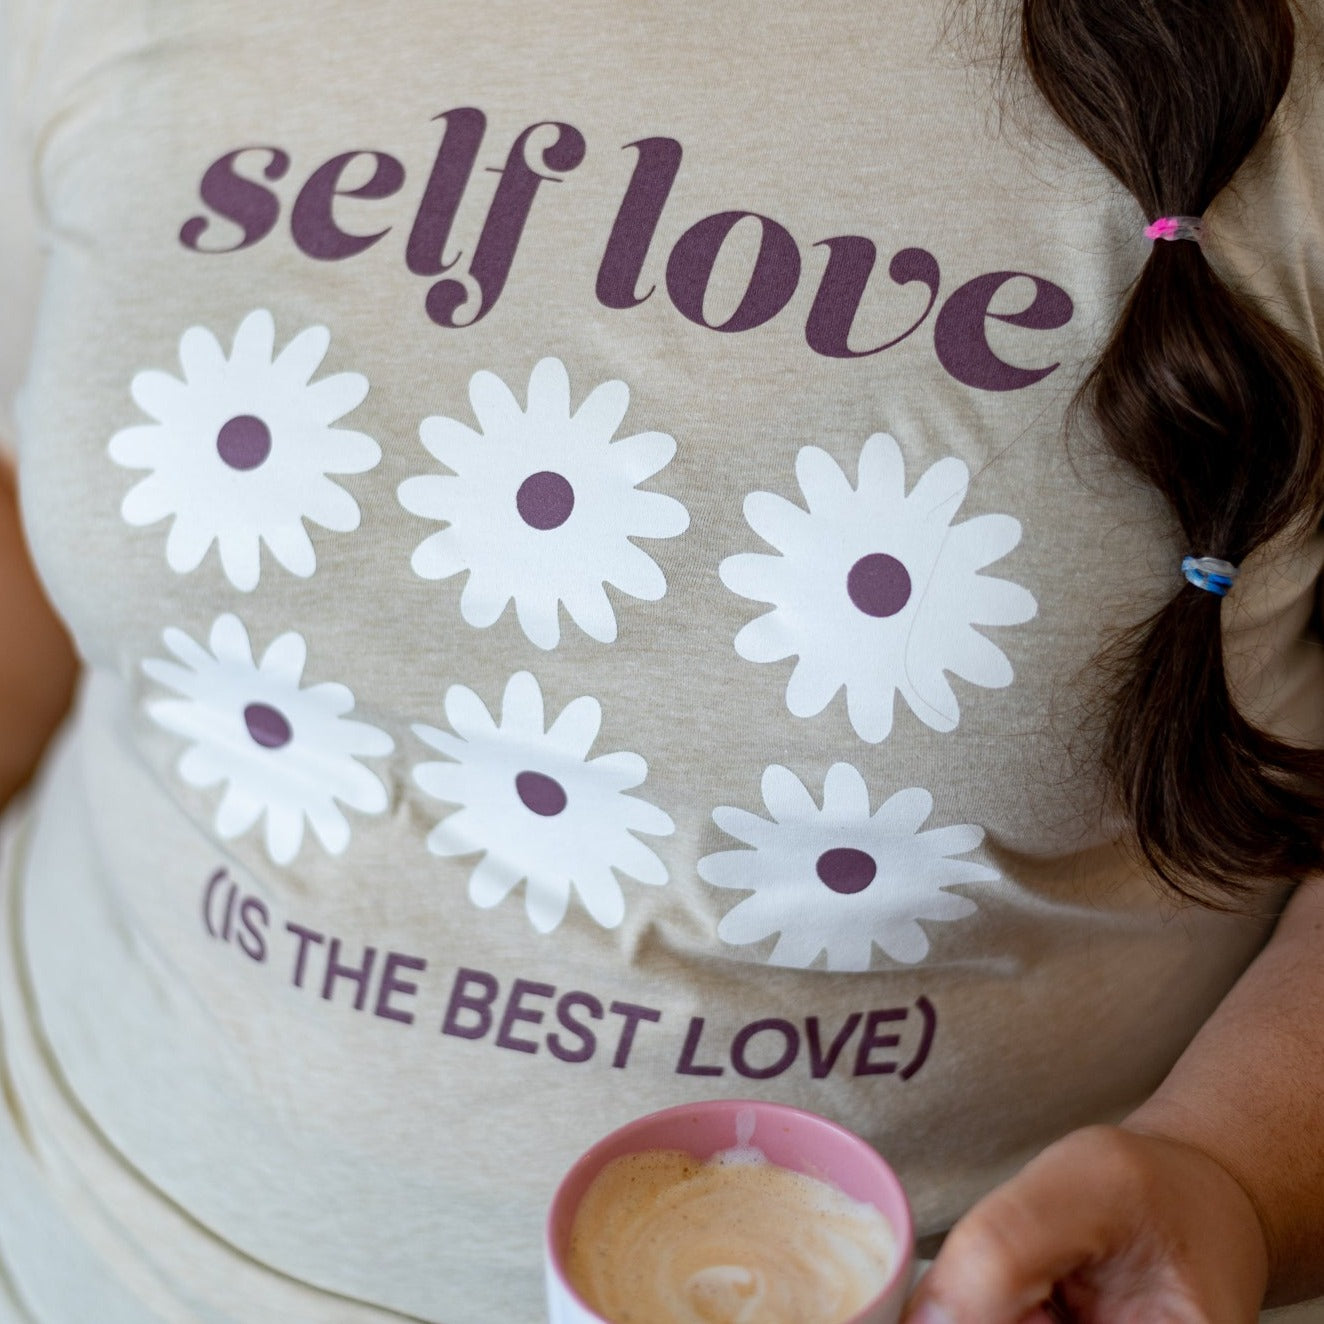 Self Love (is the Best Love)